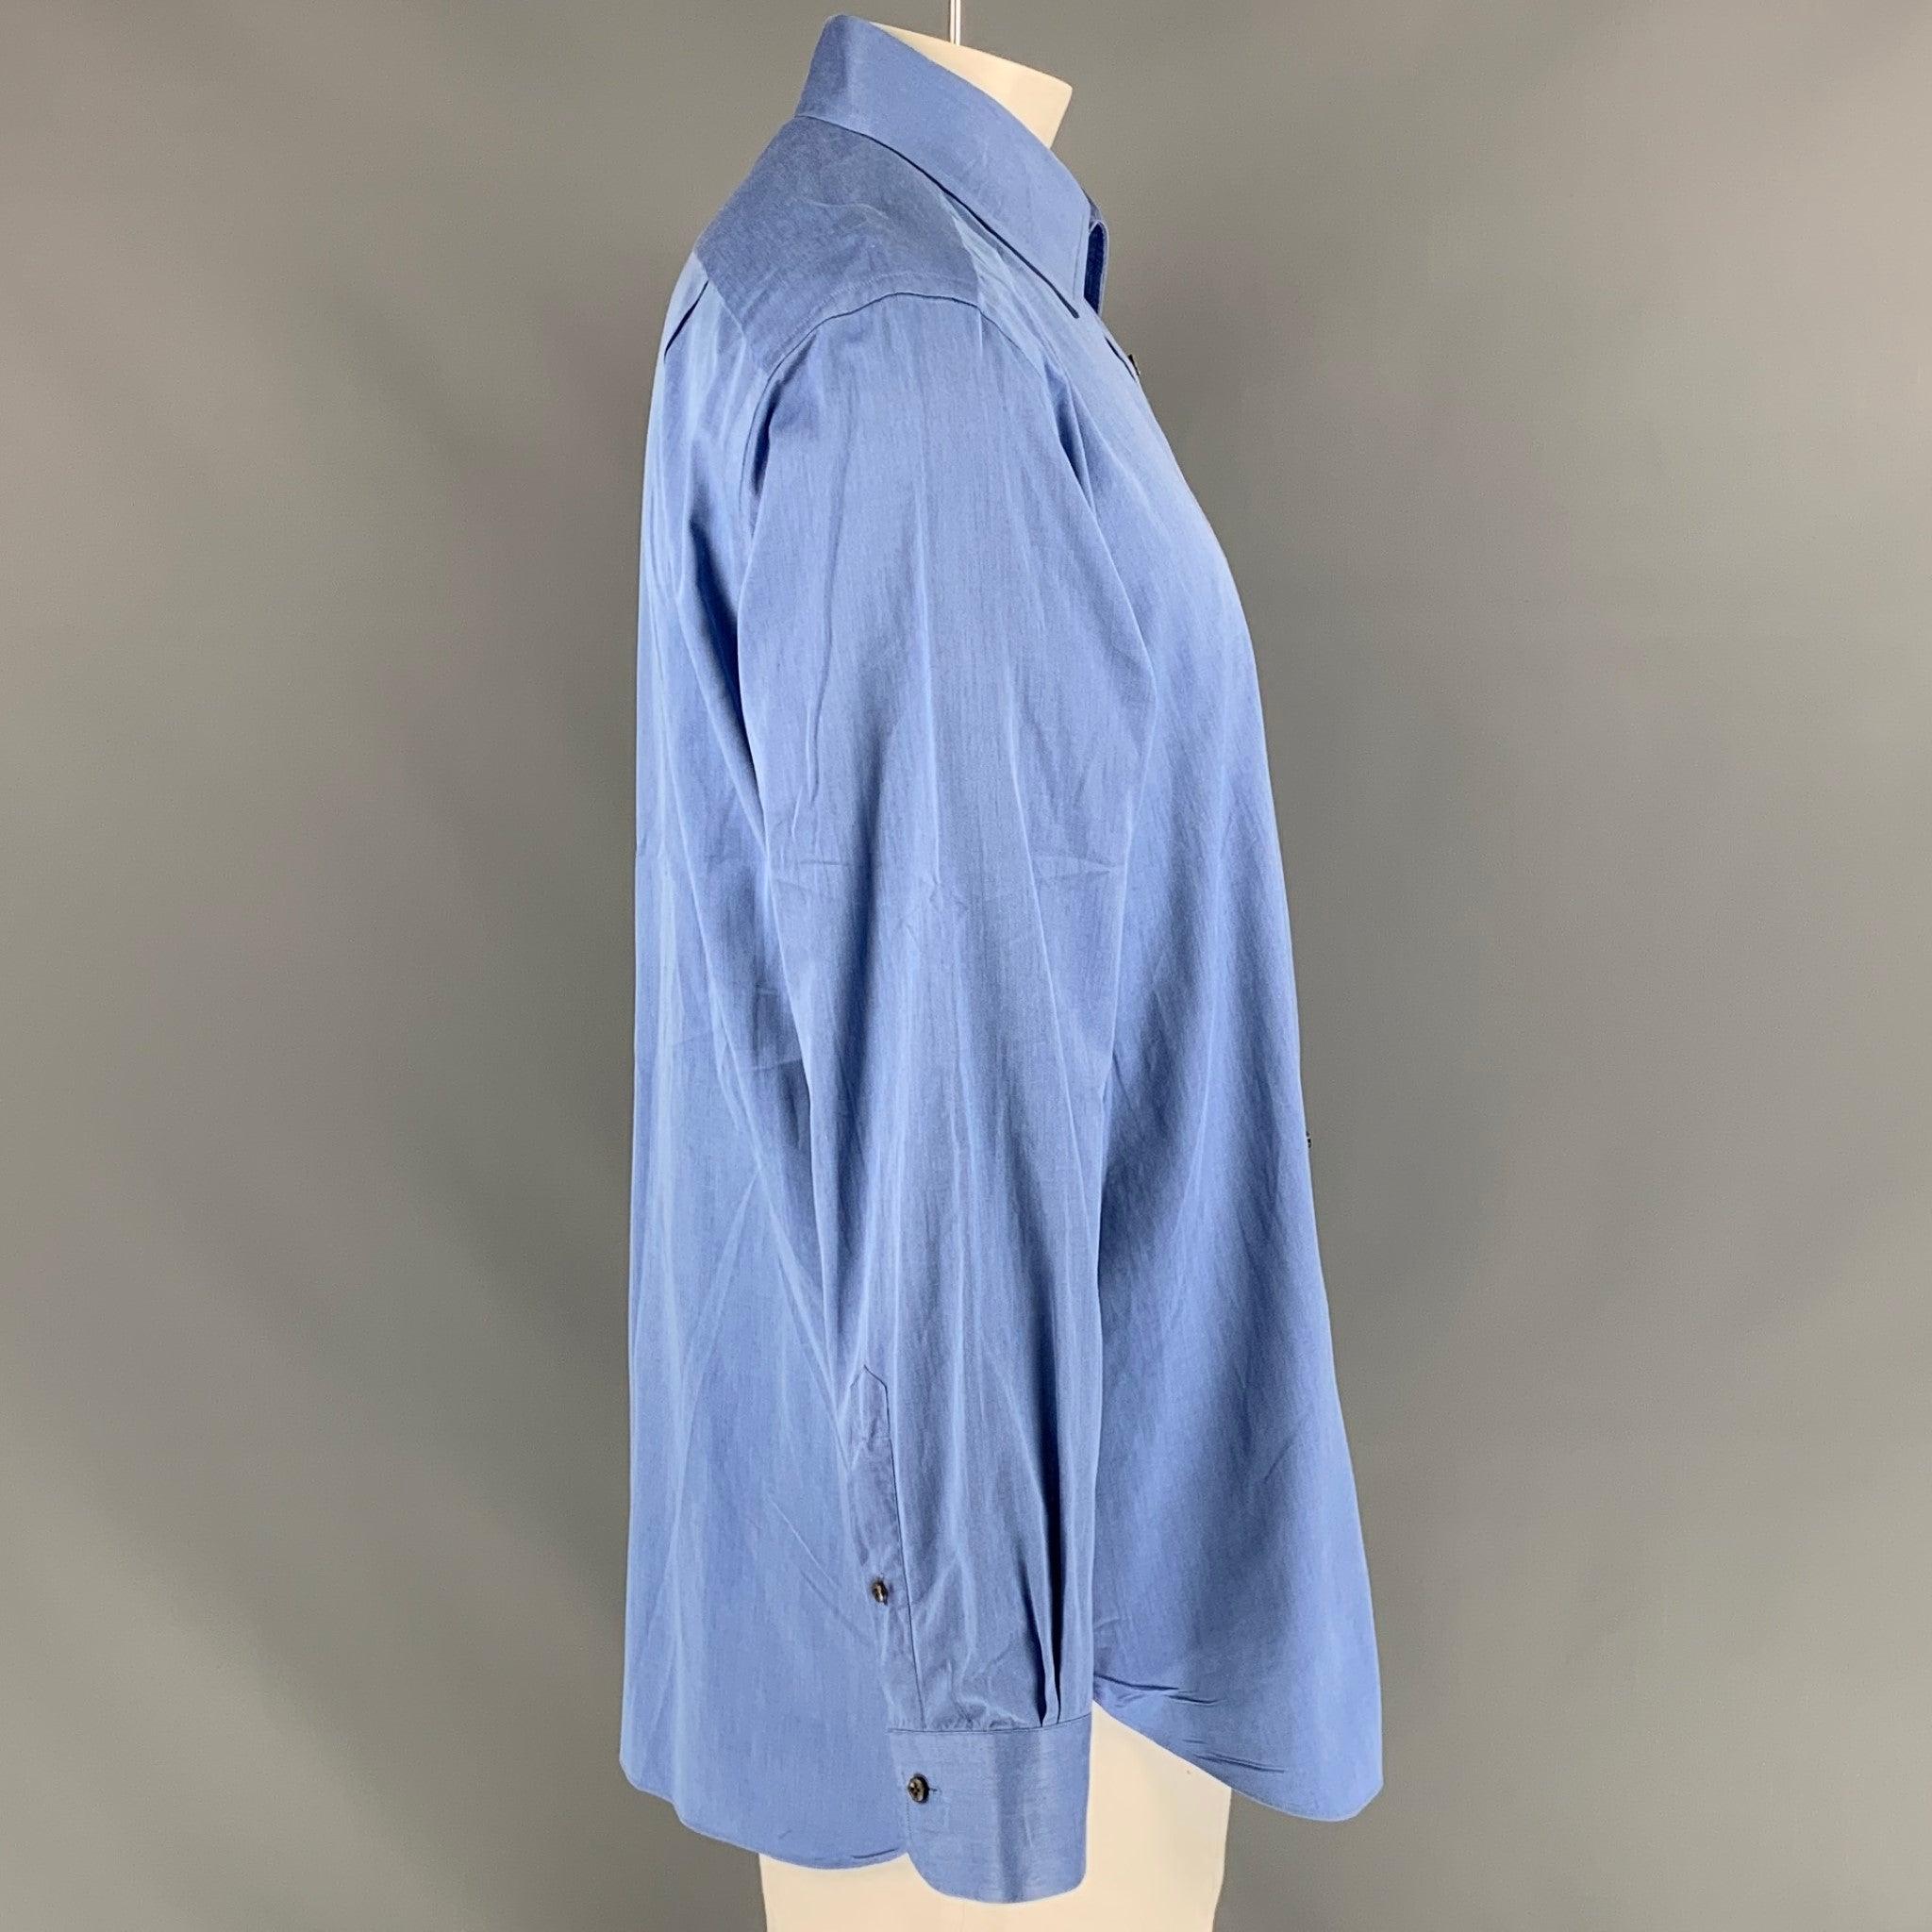 ERMENEGILDO ZEGNA Regular Fit long sleeve shirt comes in blue cotton featuring a patch pocket at left front panel, straight collar, one button round cuff, and button up closure. Very Good Pre-Owned Condition. Minor mark at the back. 

Marked:   44/